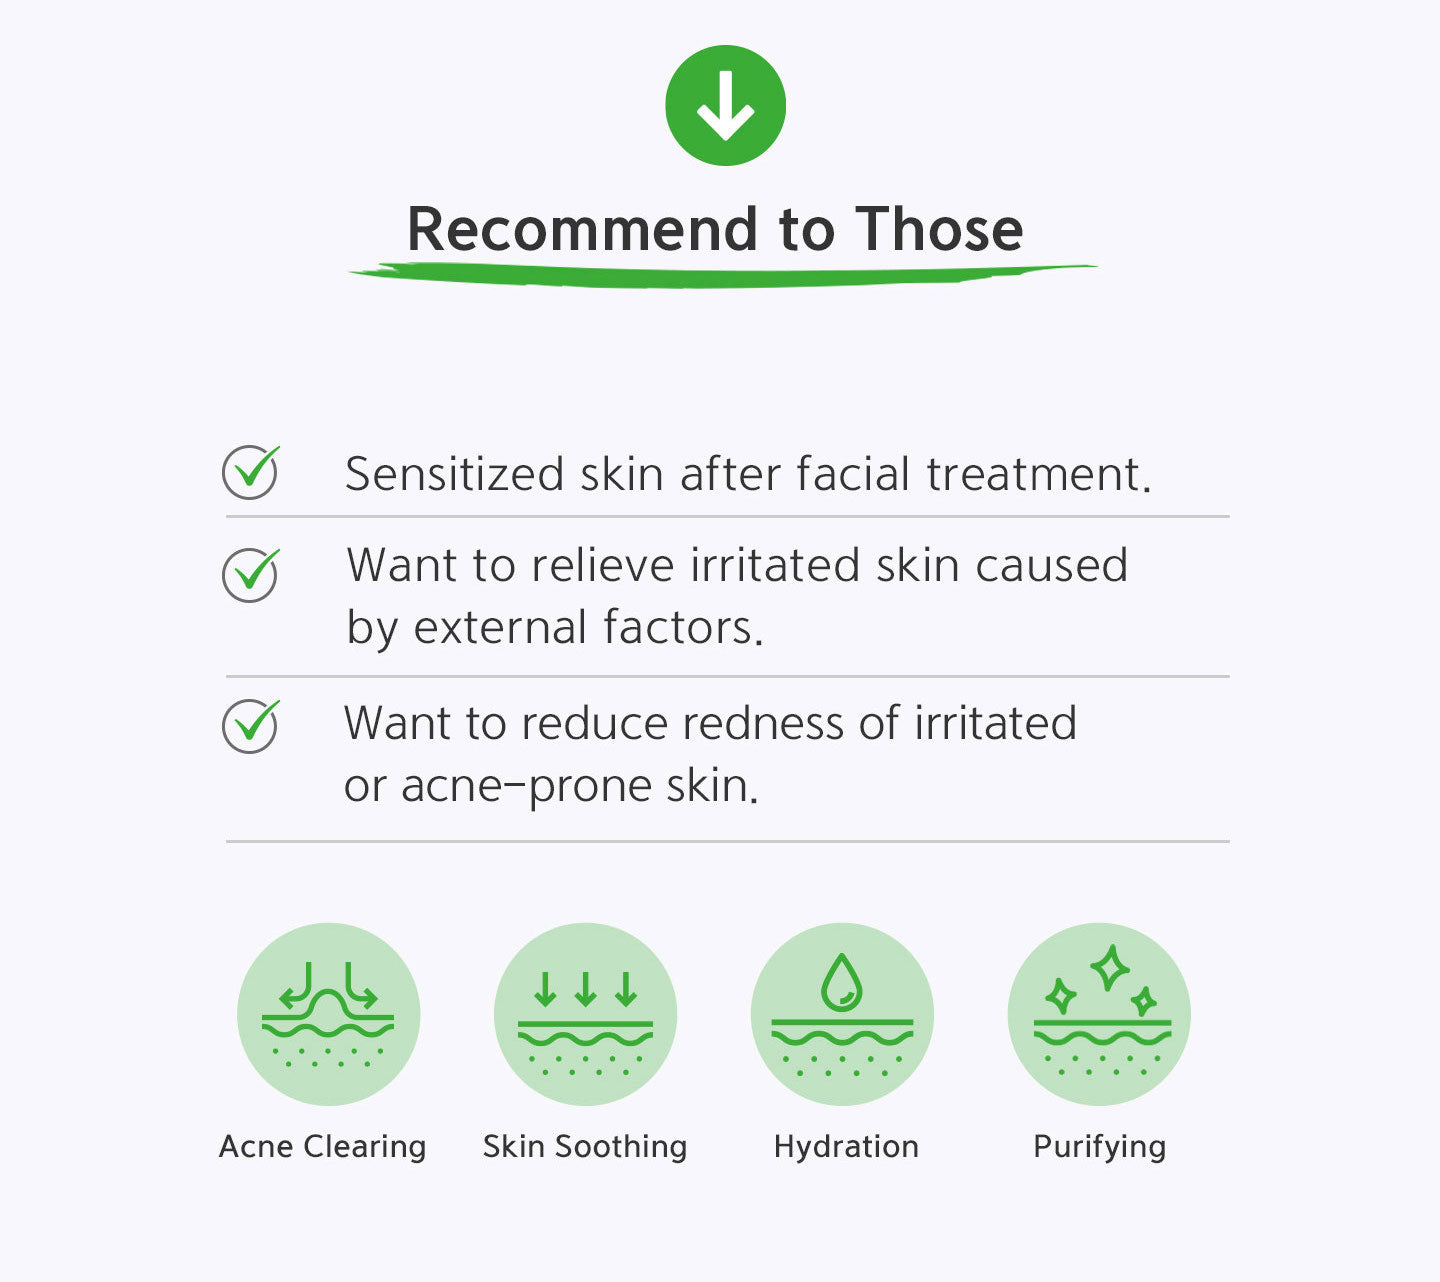 Recommend to those who have sensitized skin after facial treatment; who want to relieve irritated skin caused by external factors; who want to reduce redness of irritated or acne-prone skin. Acne clearing, skin soothing, hydration and purifying. 